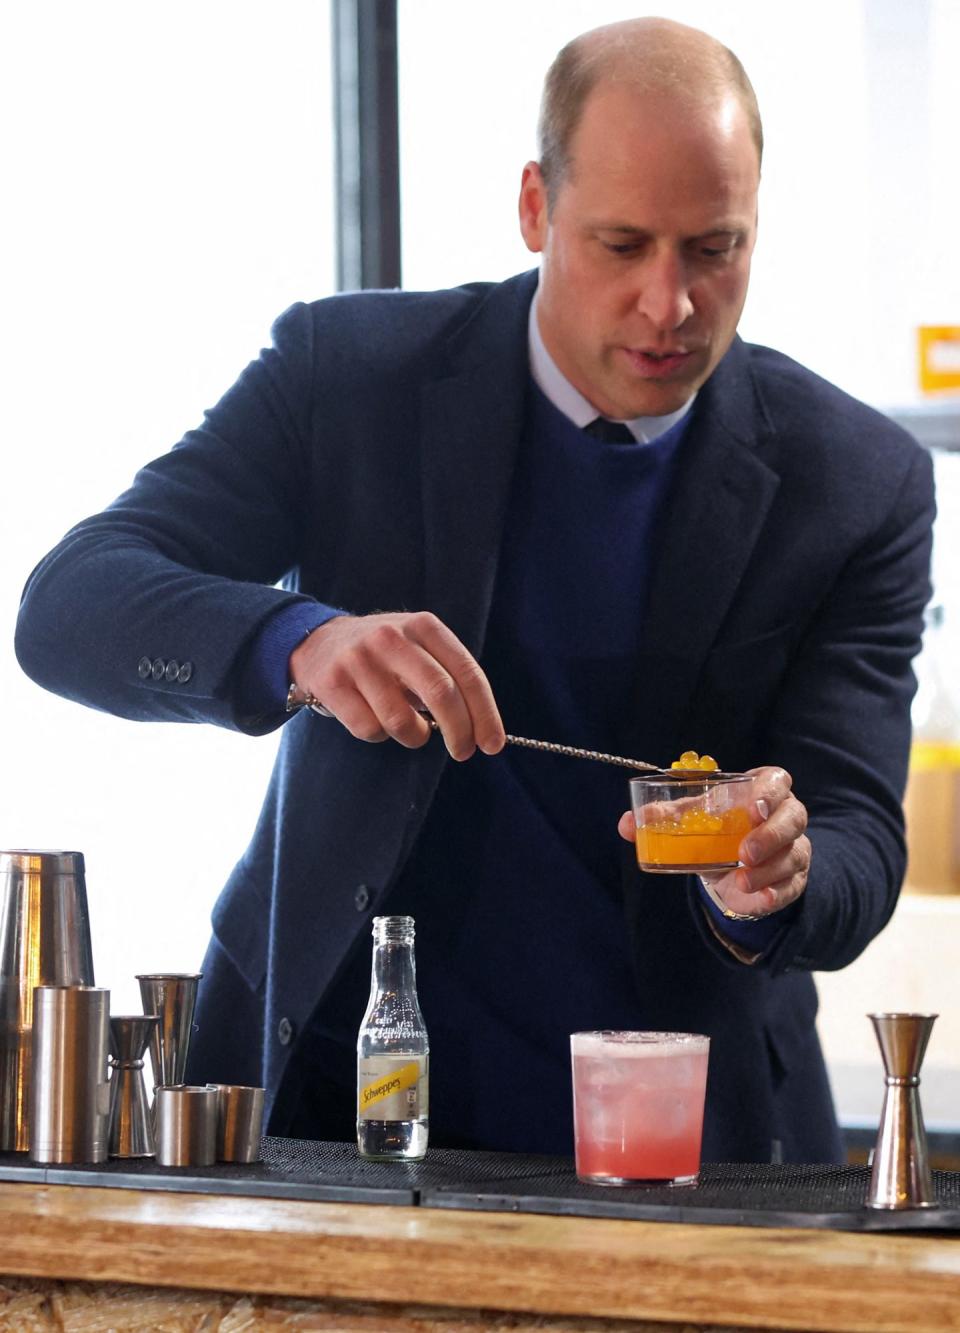 <p>William and Kate hopped behind the bar to see who could craft a cocktail faster at Trademarket, an outdoor street food and retail market situated in the heart of Belfast.</p>